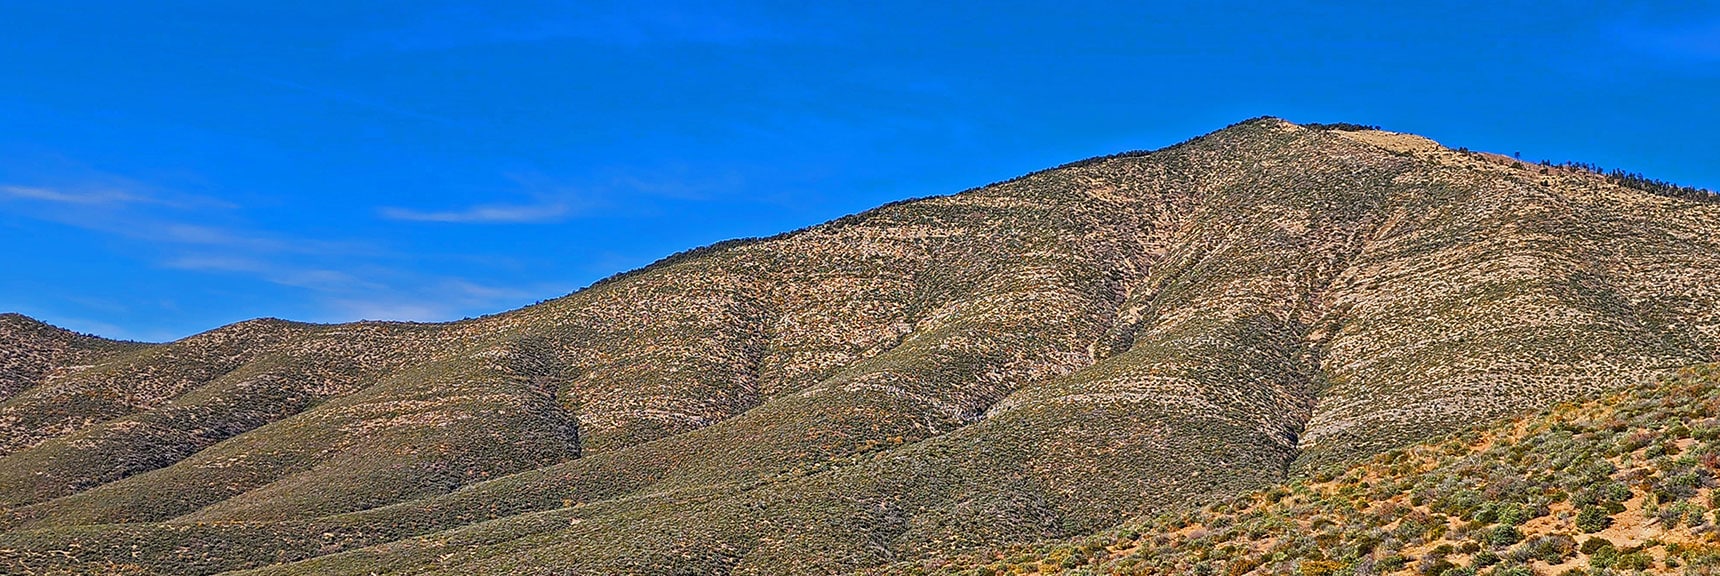 Upper Ascent Ridge from Lovell Summit Road to Sexton Ridgeline. | Griffith Shadow Loop | Lovell Canyon, Nevada